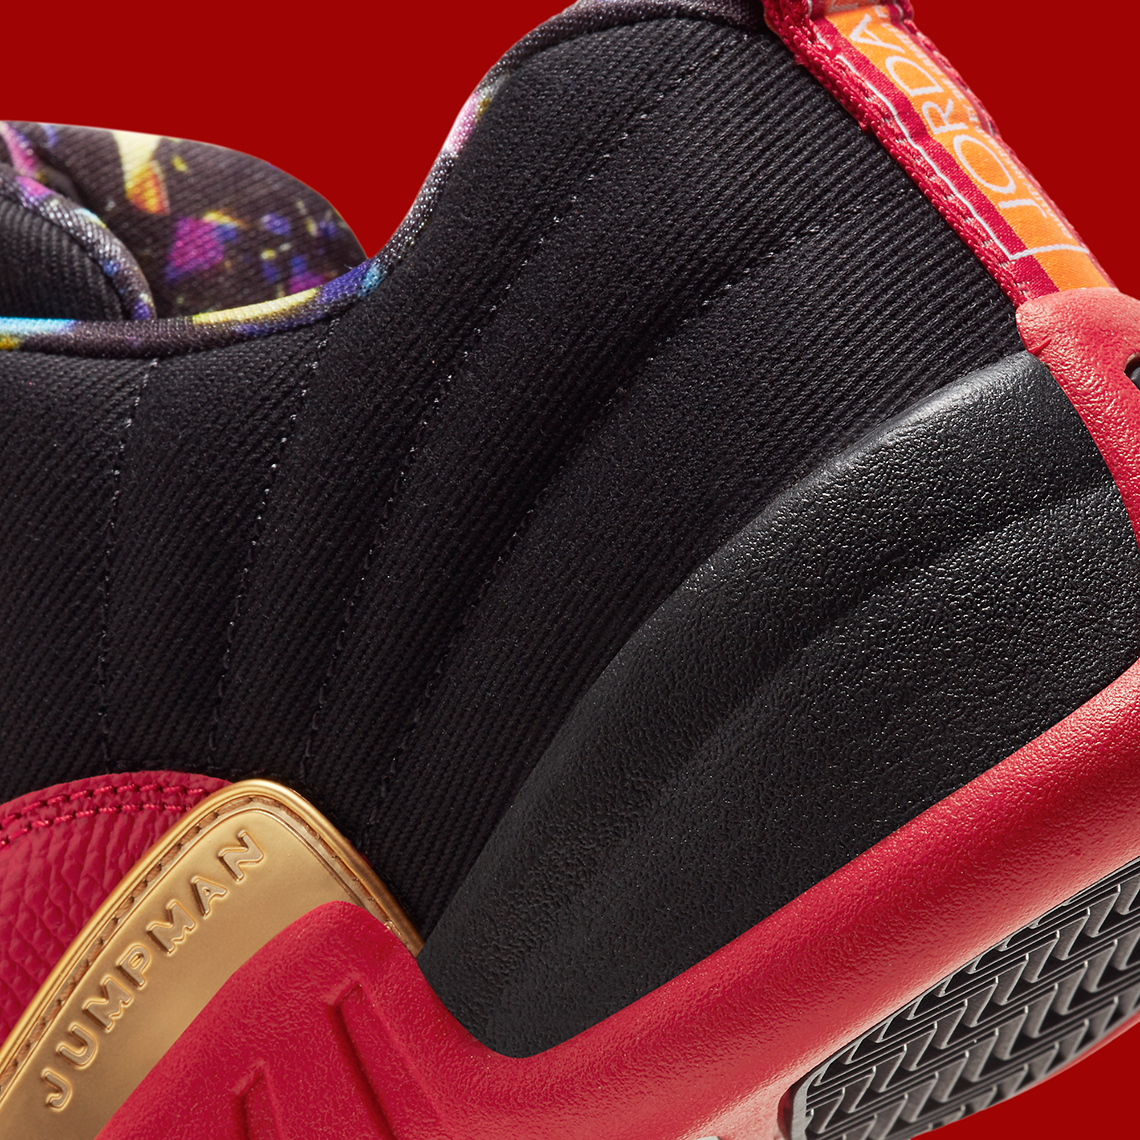 Solestice -, RELEASE REMINDER, Men's Air Jordan Retro 12 Low “Super Bowl”  will be available FCFS tomorrow at 10am! $190